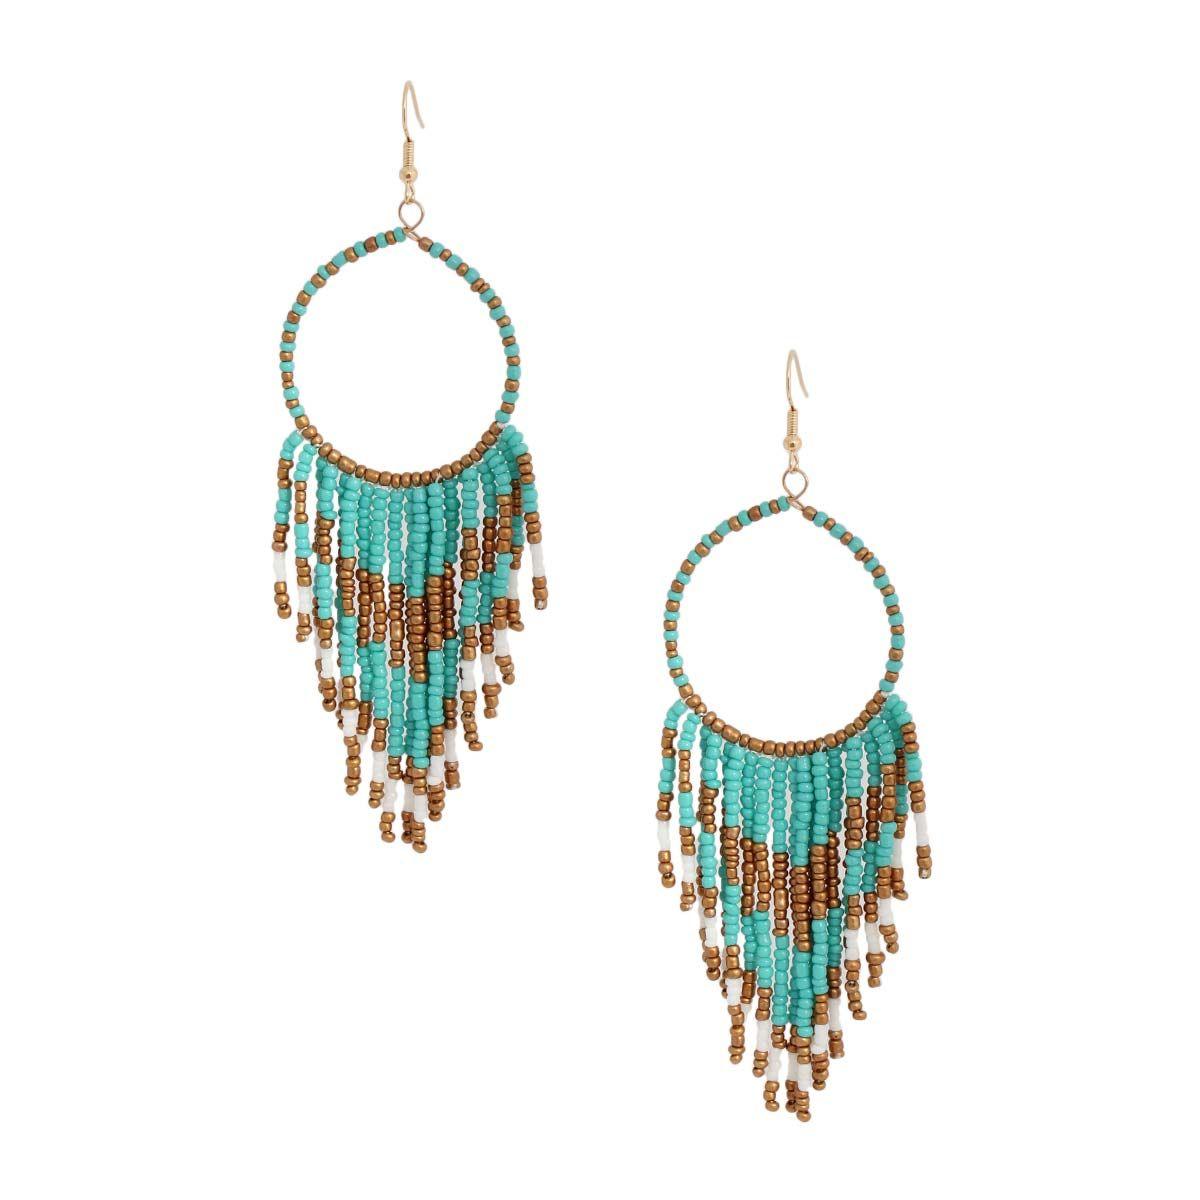 Get Noticed with Turquoise & Gold Bead Fringe Earrings - Order Now!